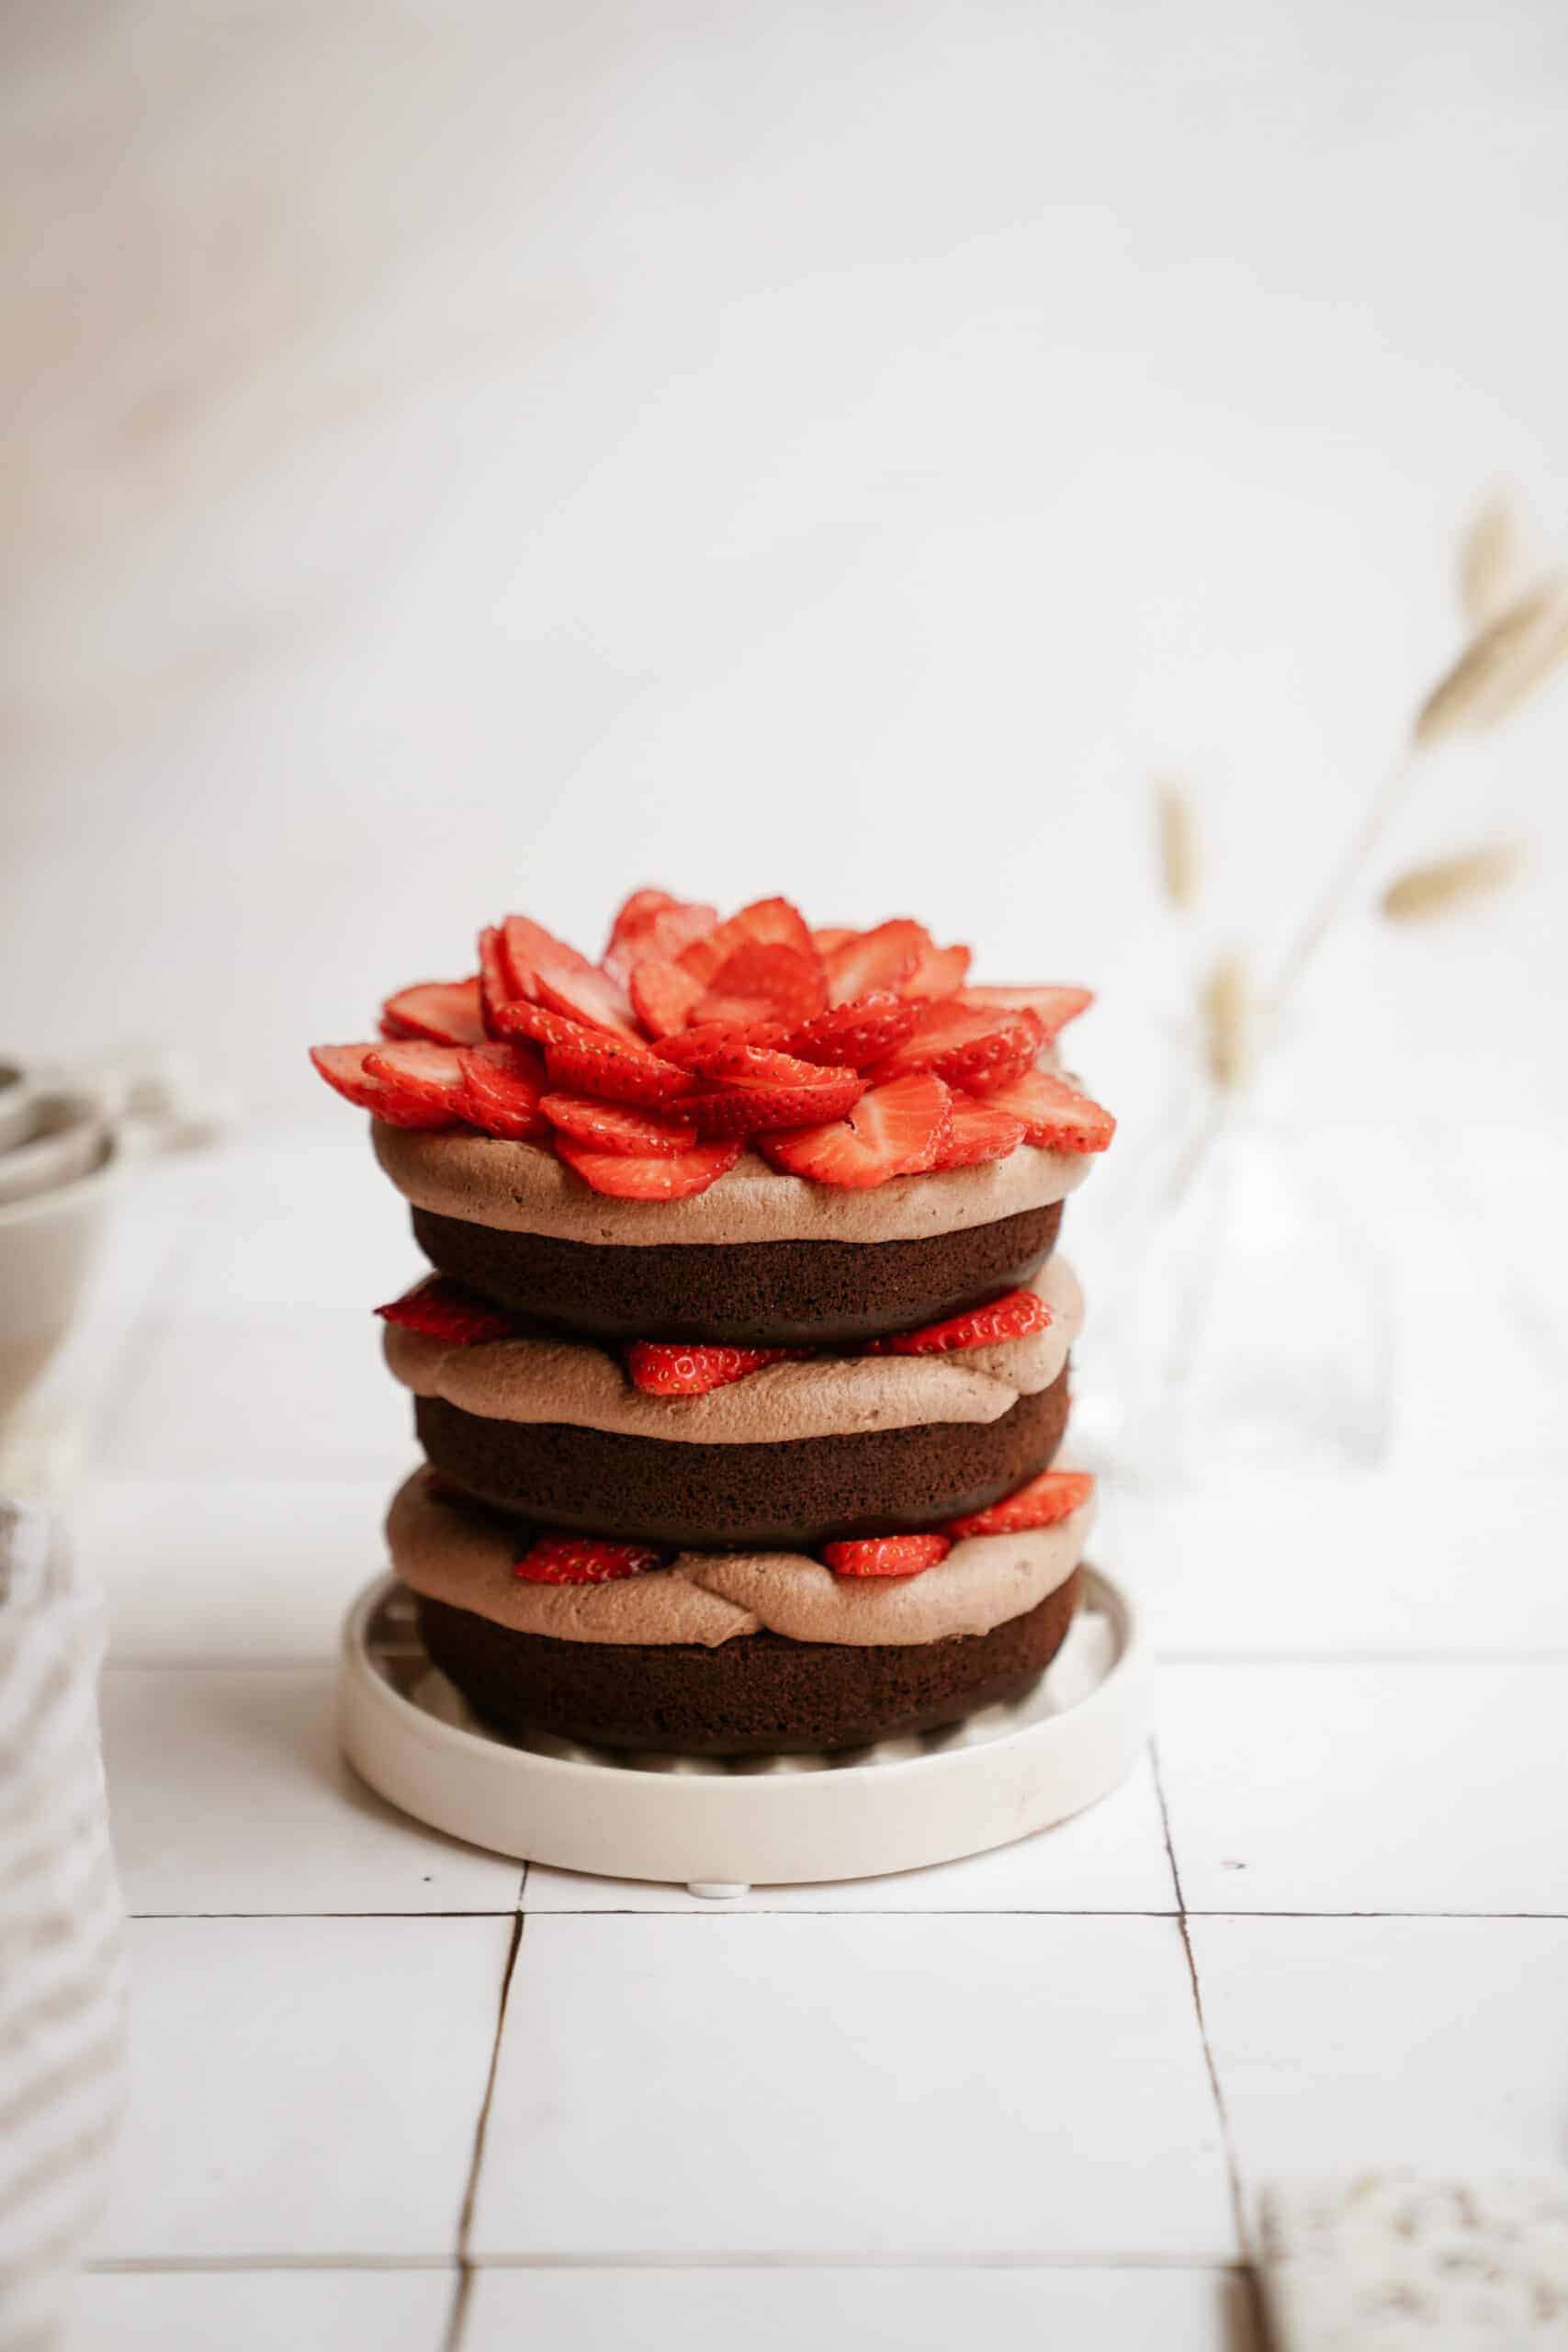 Gluten-free chocolate cake on a plate with strawberries on top